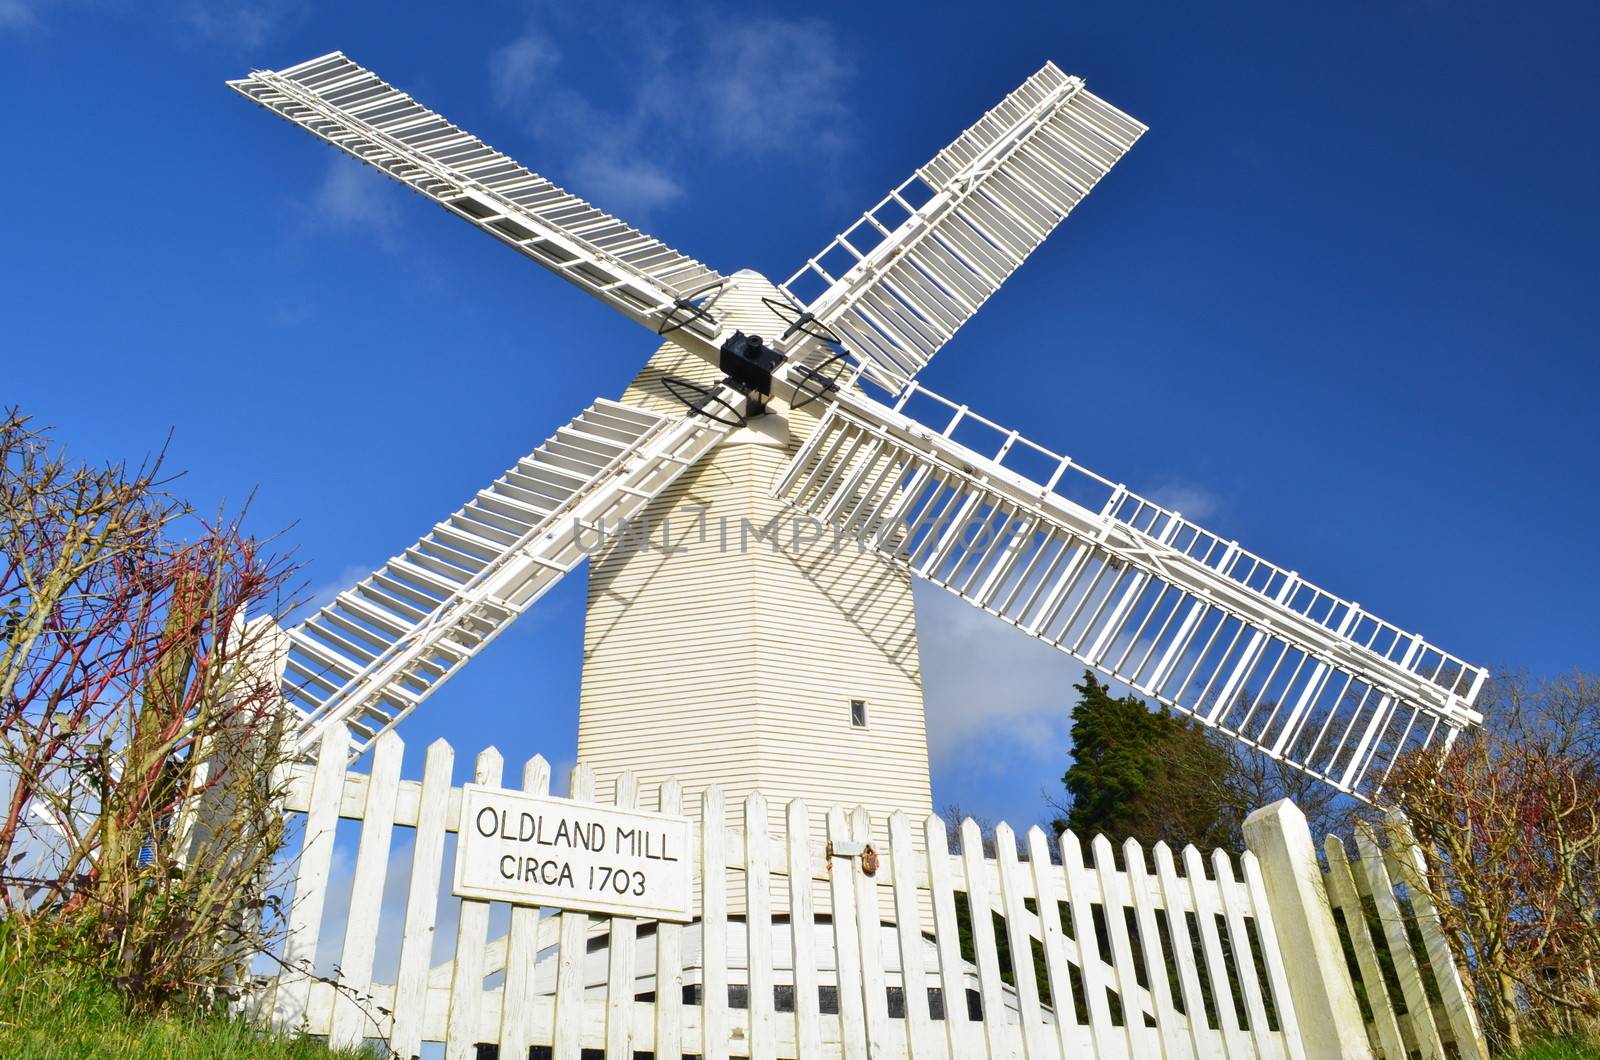 Traditional English windmill by bunsview